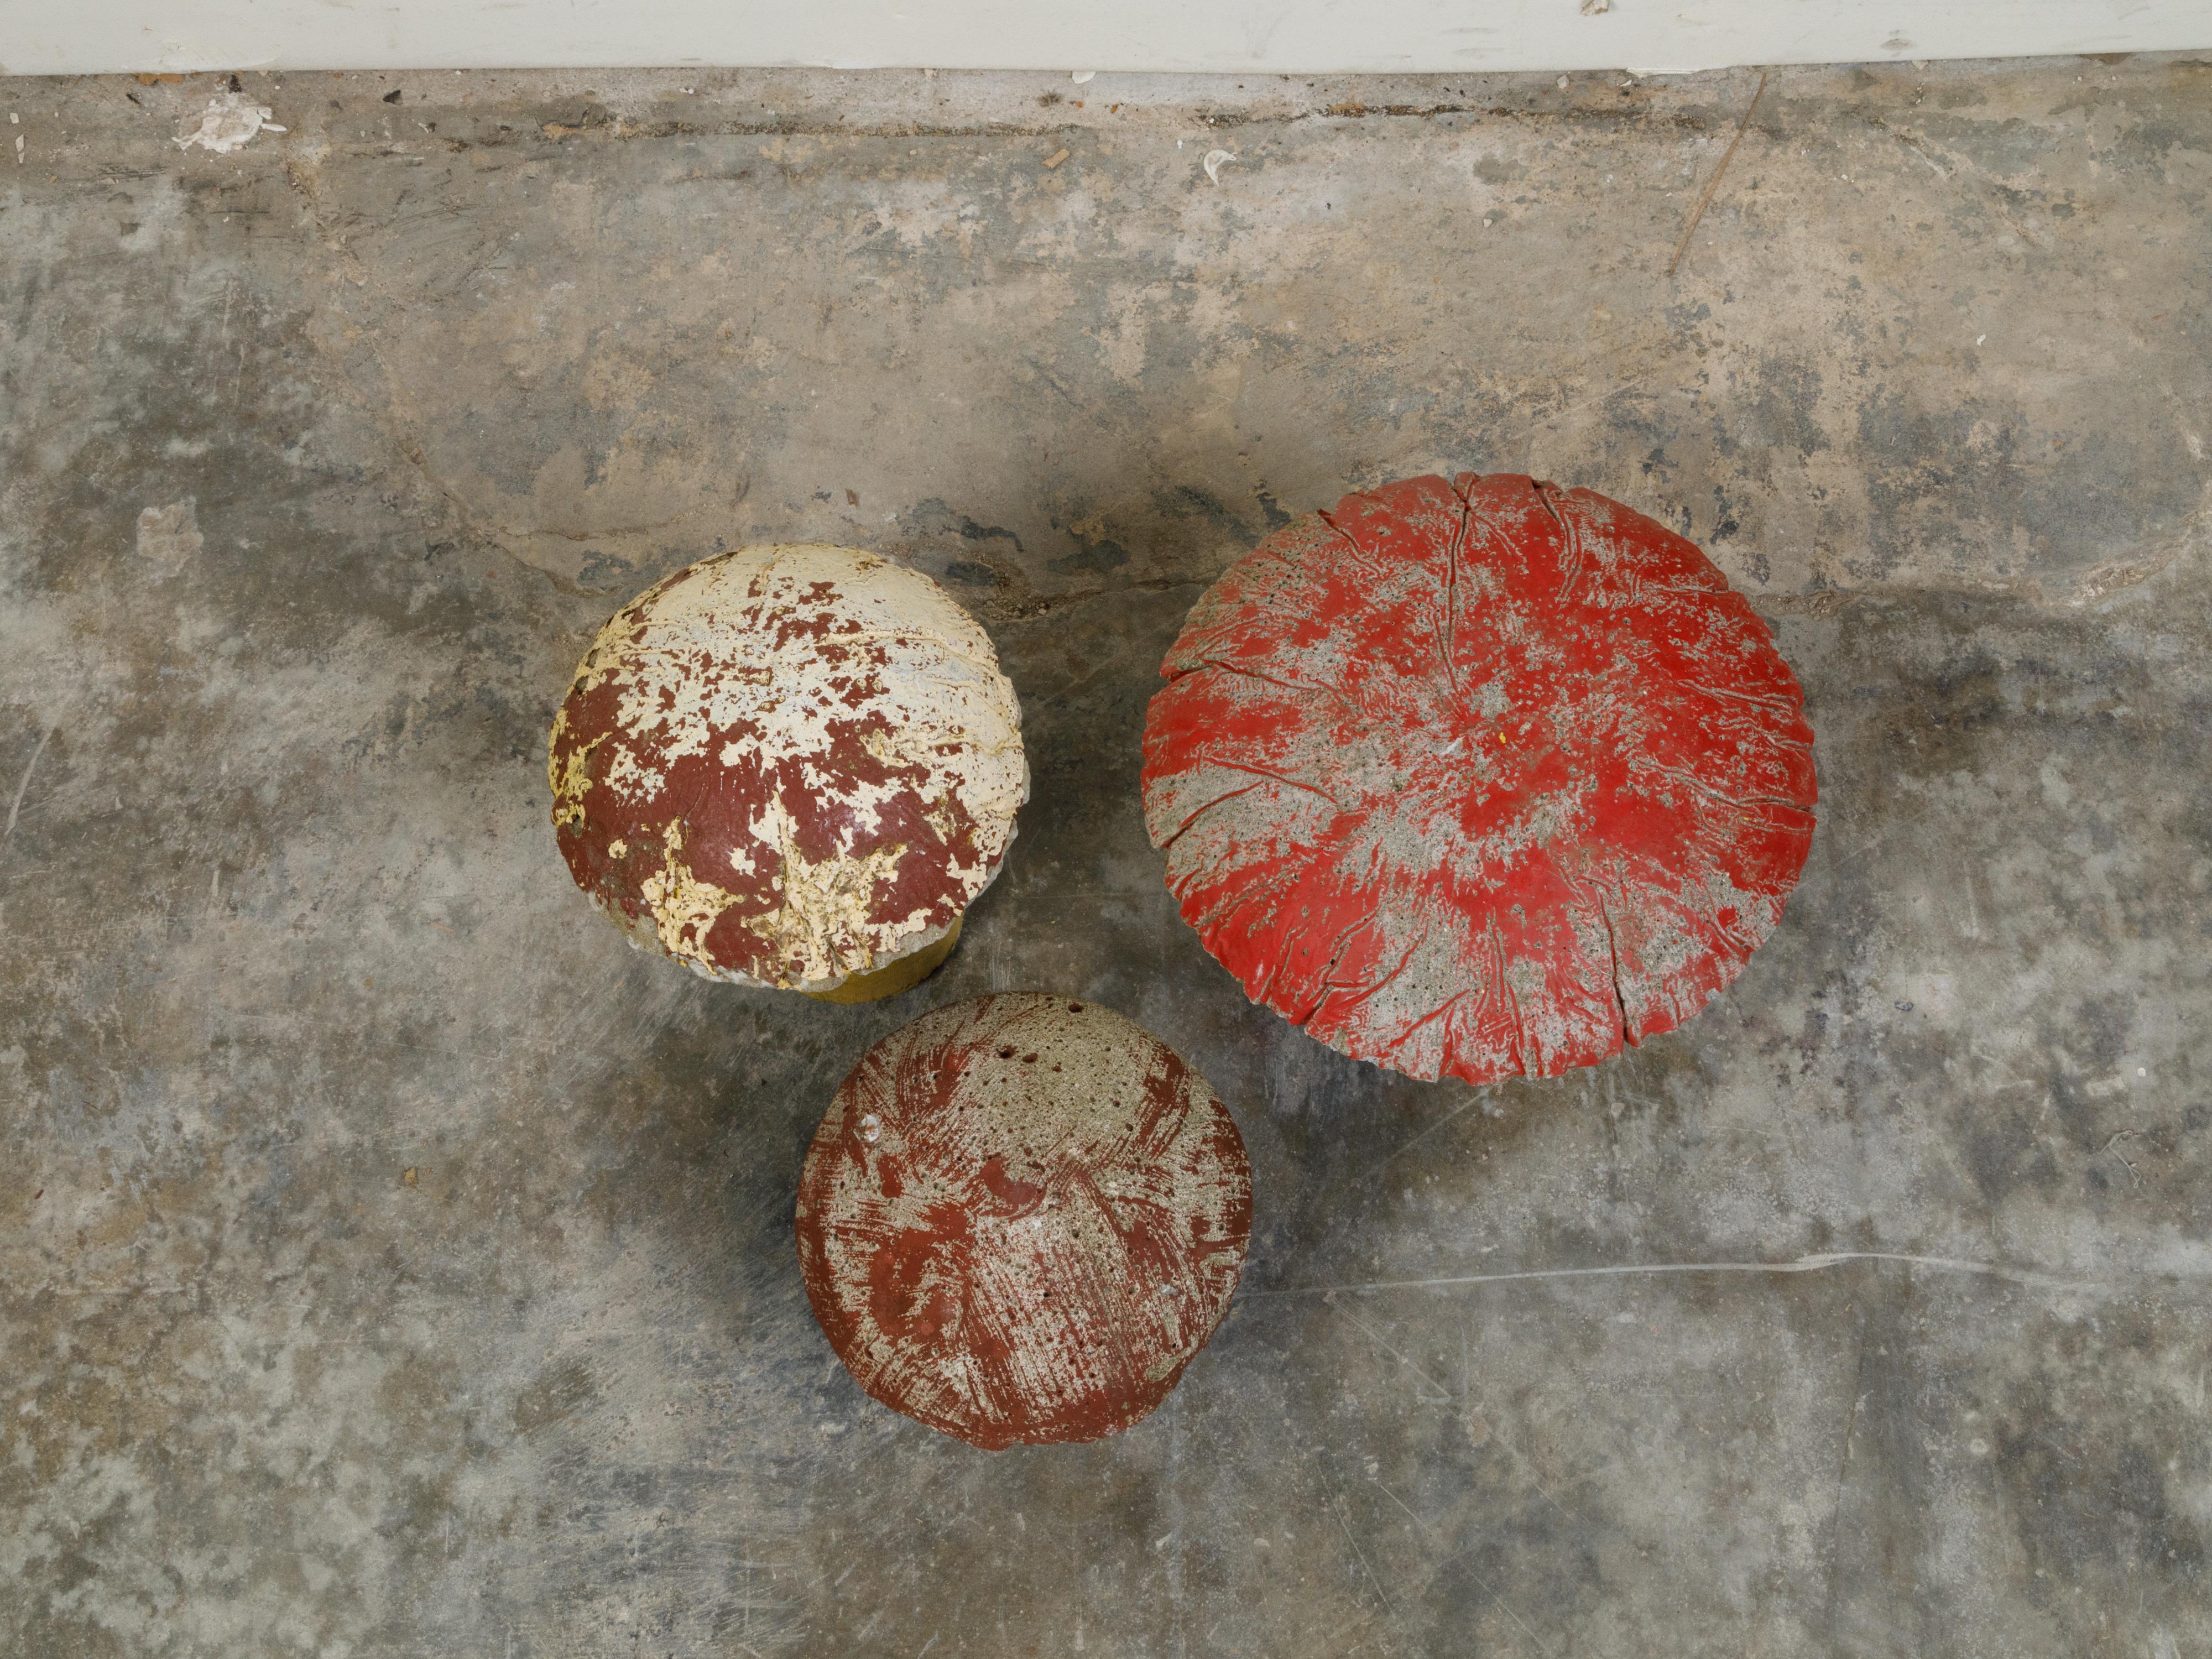 Painted Set of Three American Midcentury Concrete Mushrooms with Weathered Appearance